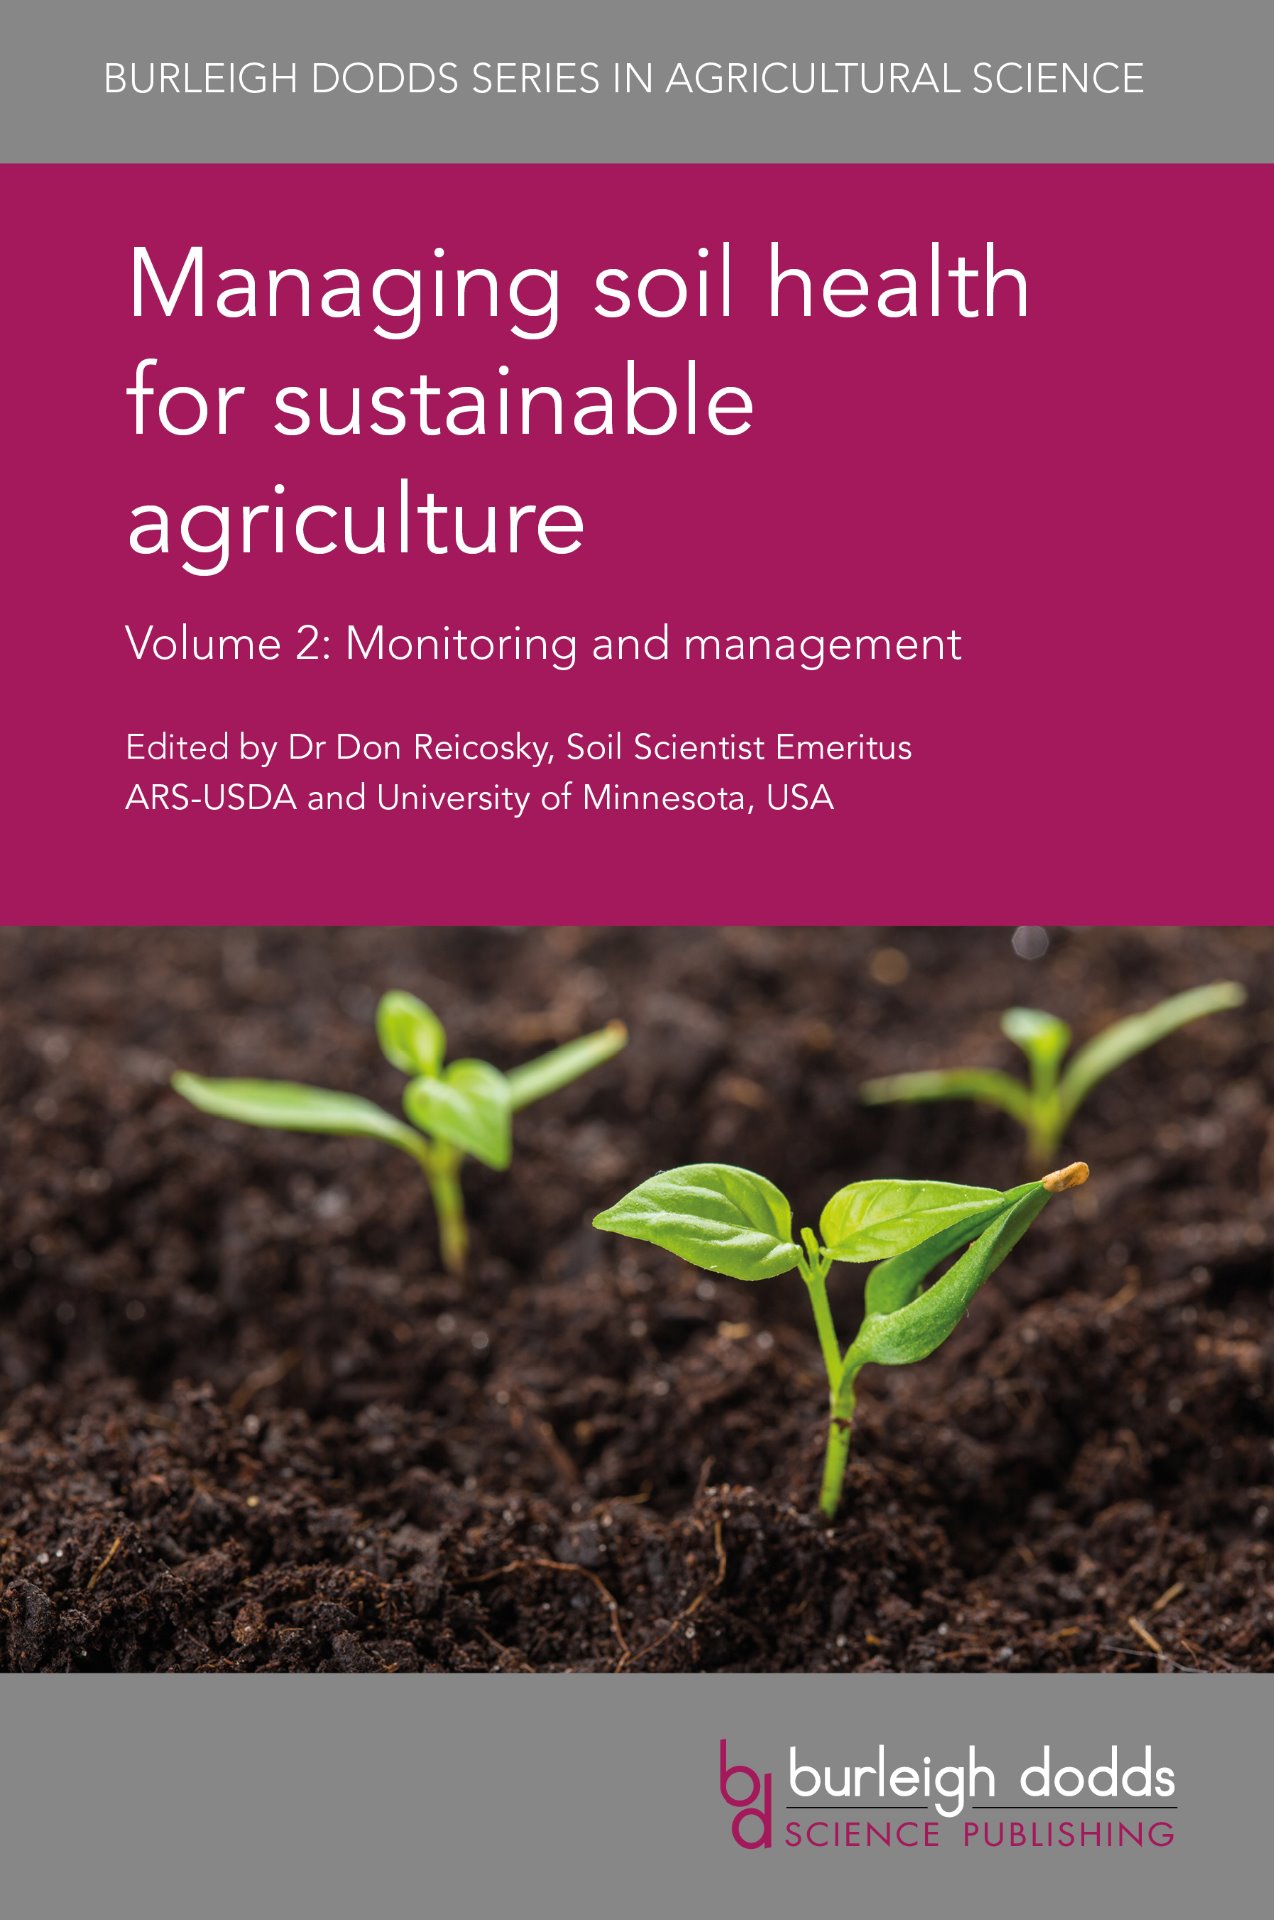 Managing soil health for sustainable agriculture Volume 2